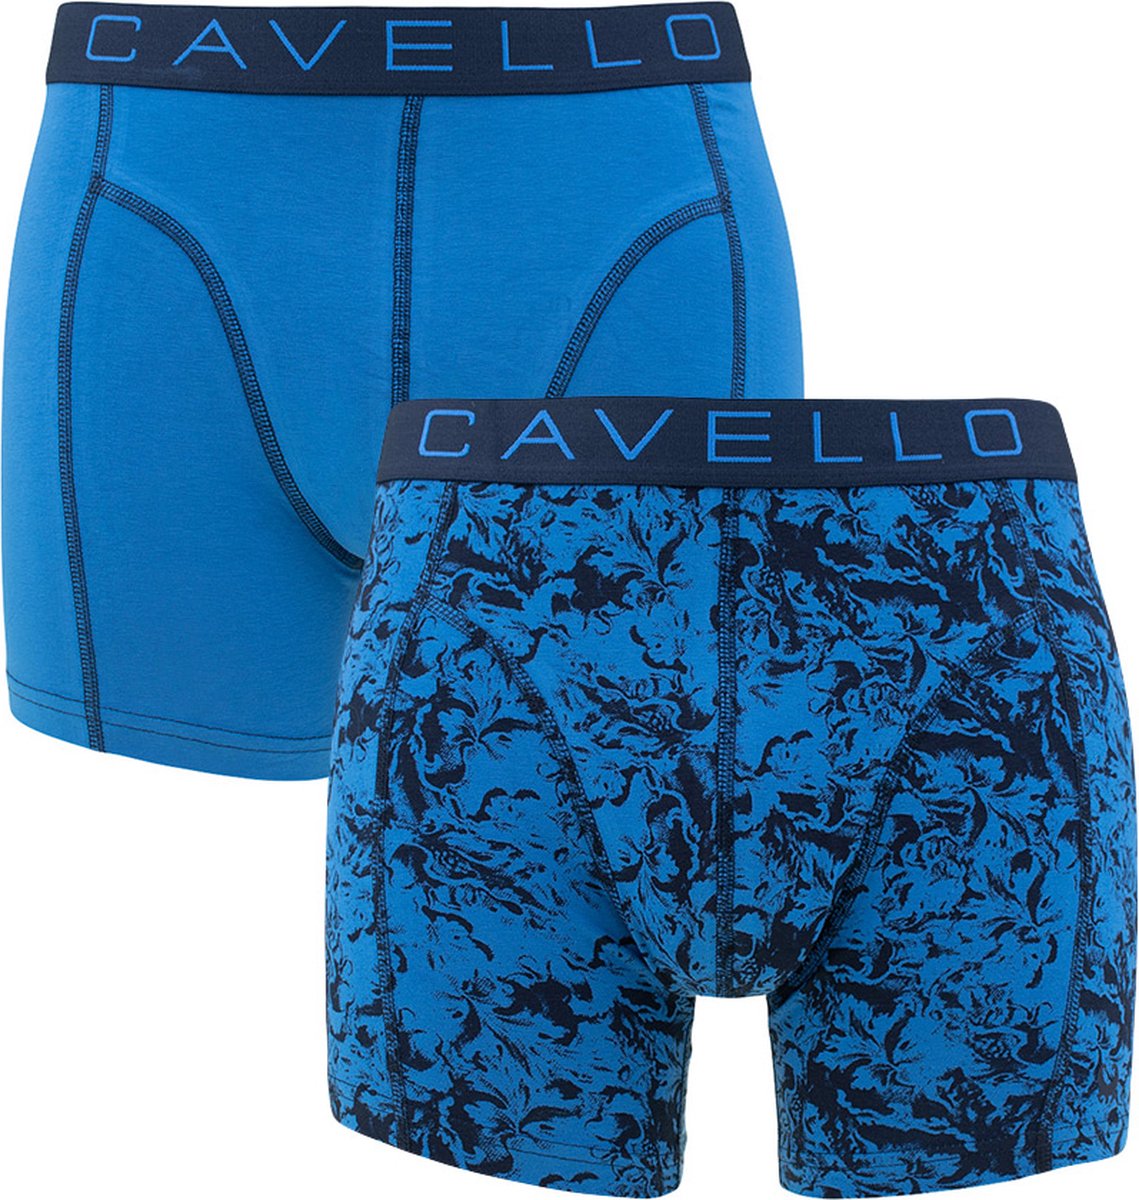 Cavello Boxershorts 2-pack Billy Jeans